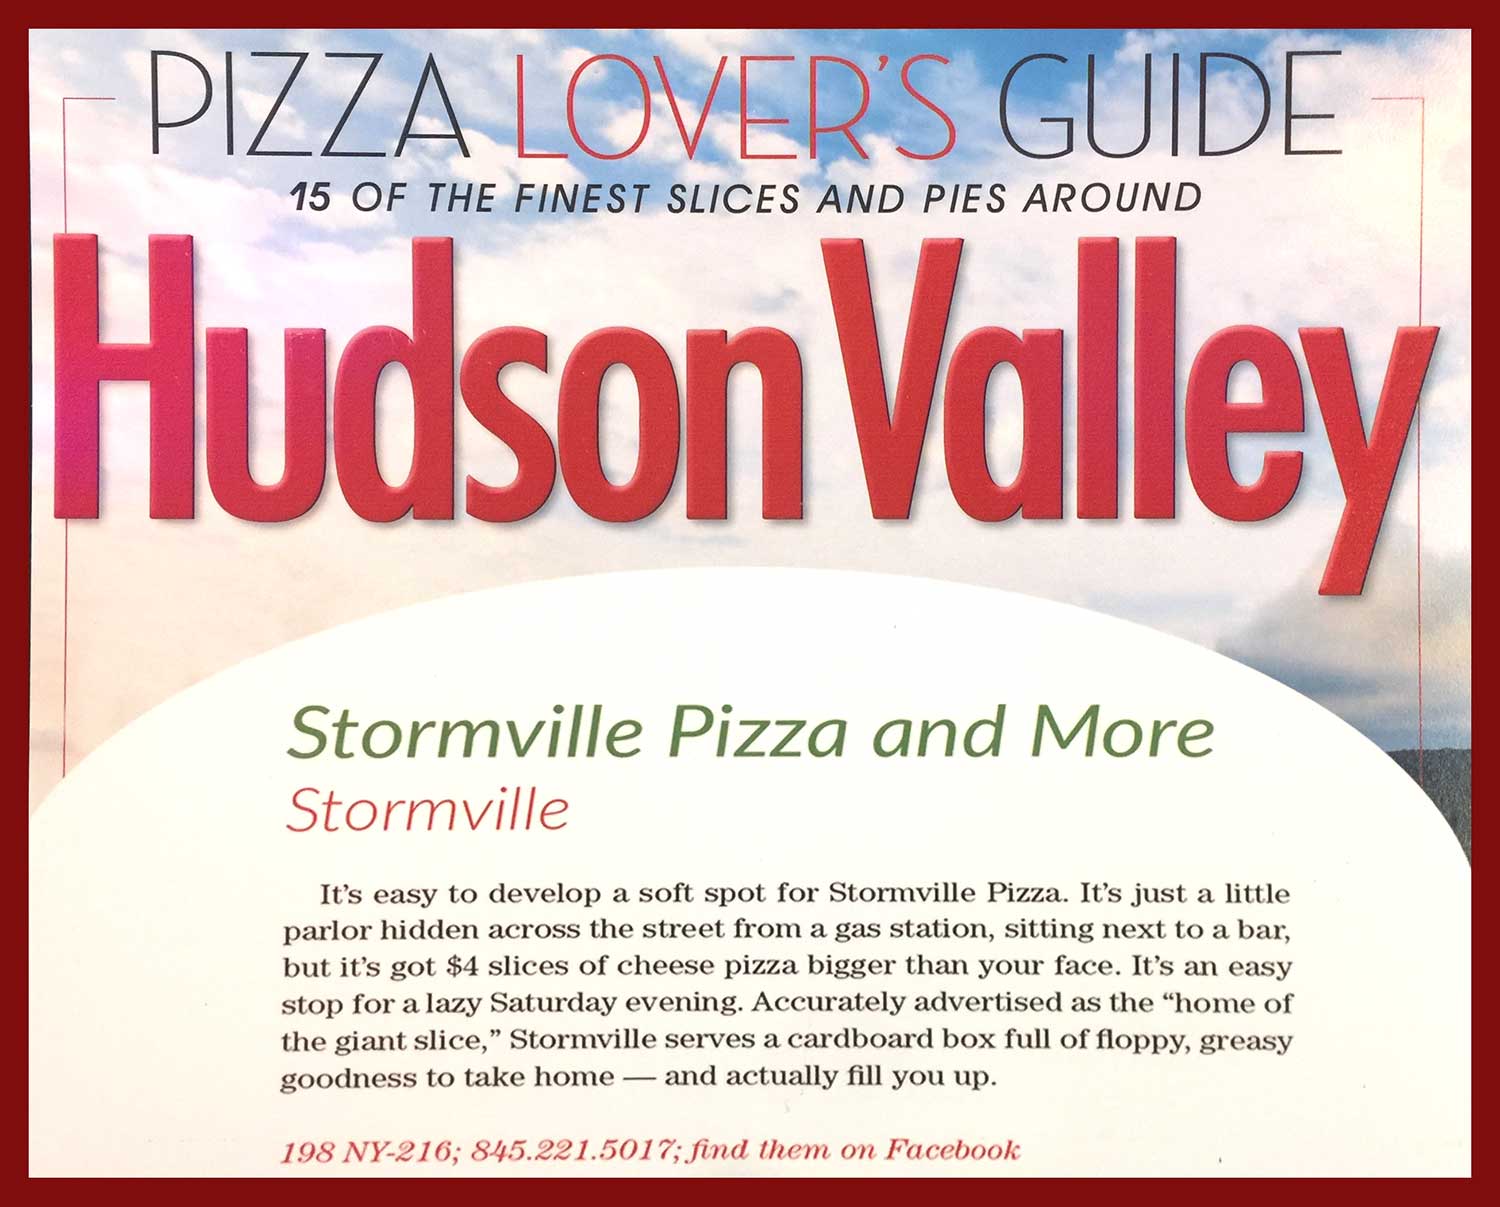 The Hudson Valley Pizza Lover’s Guide